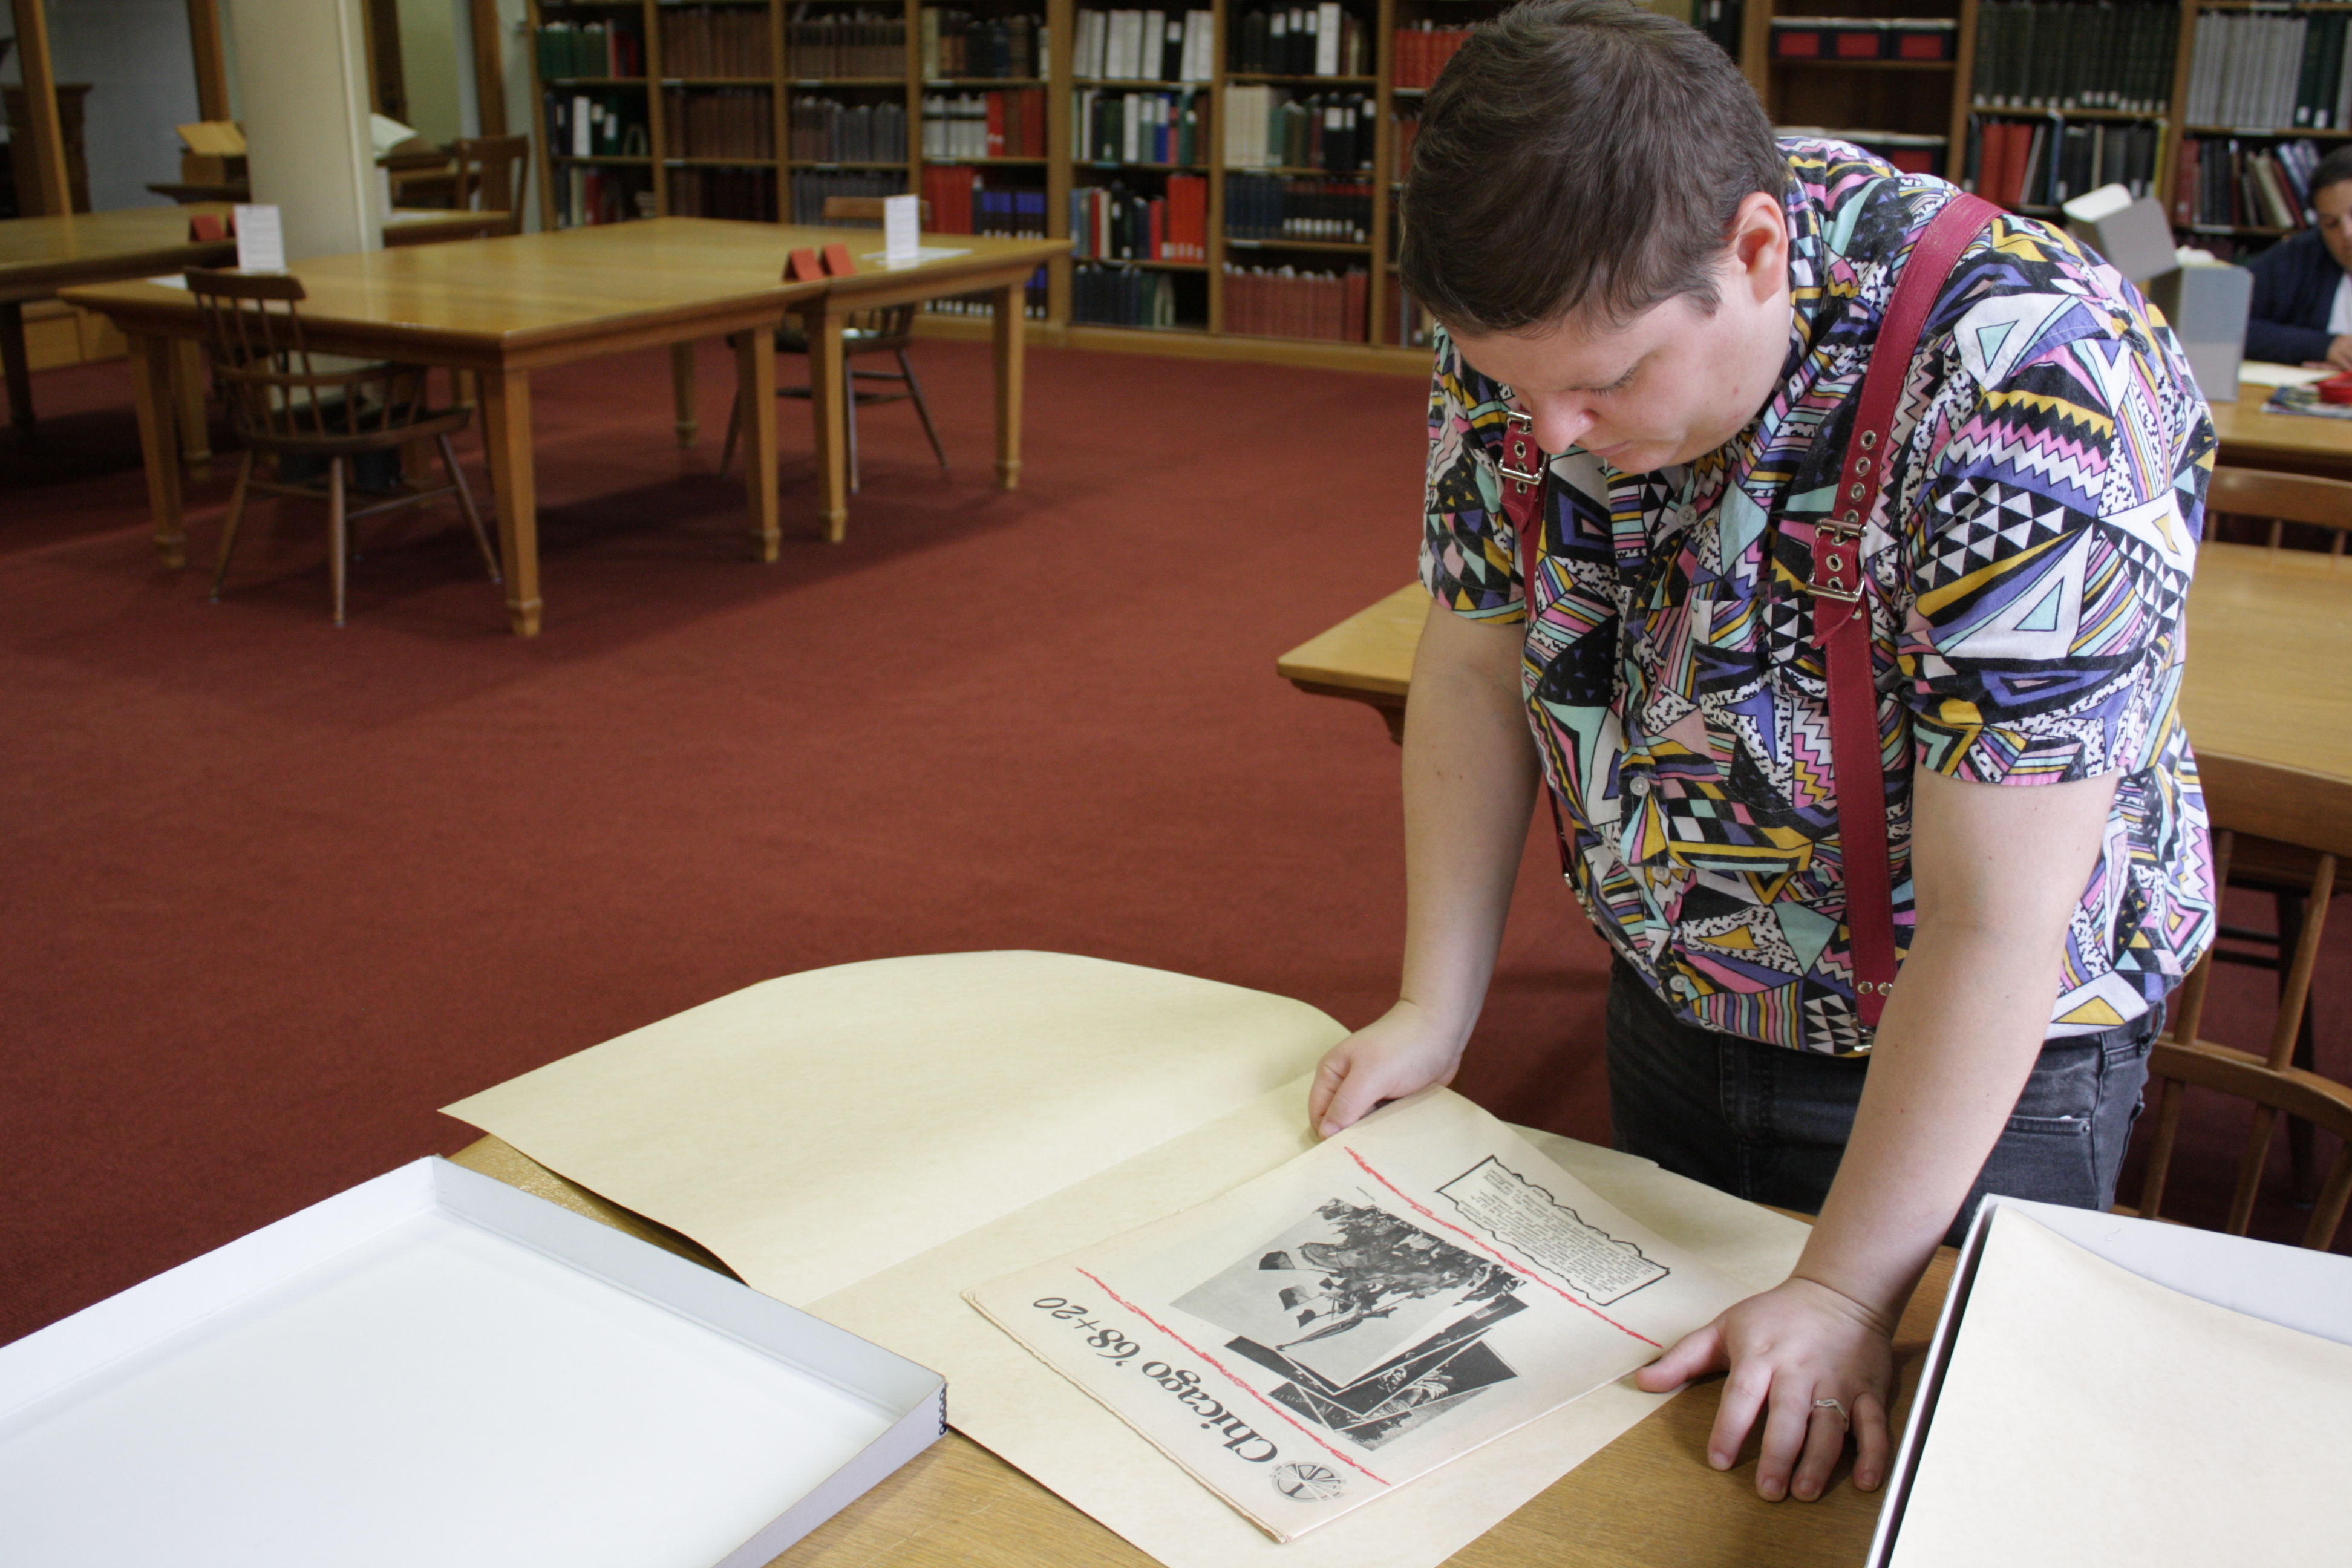 Image: H. Melt stands over a table at the Newberry Library looking at a piece of ephemera in an archival folder. They are wearing a shirt with brightly colored geometric designs and red suspenders. Photo by Ally Almore.